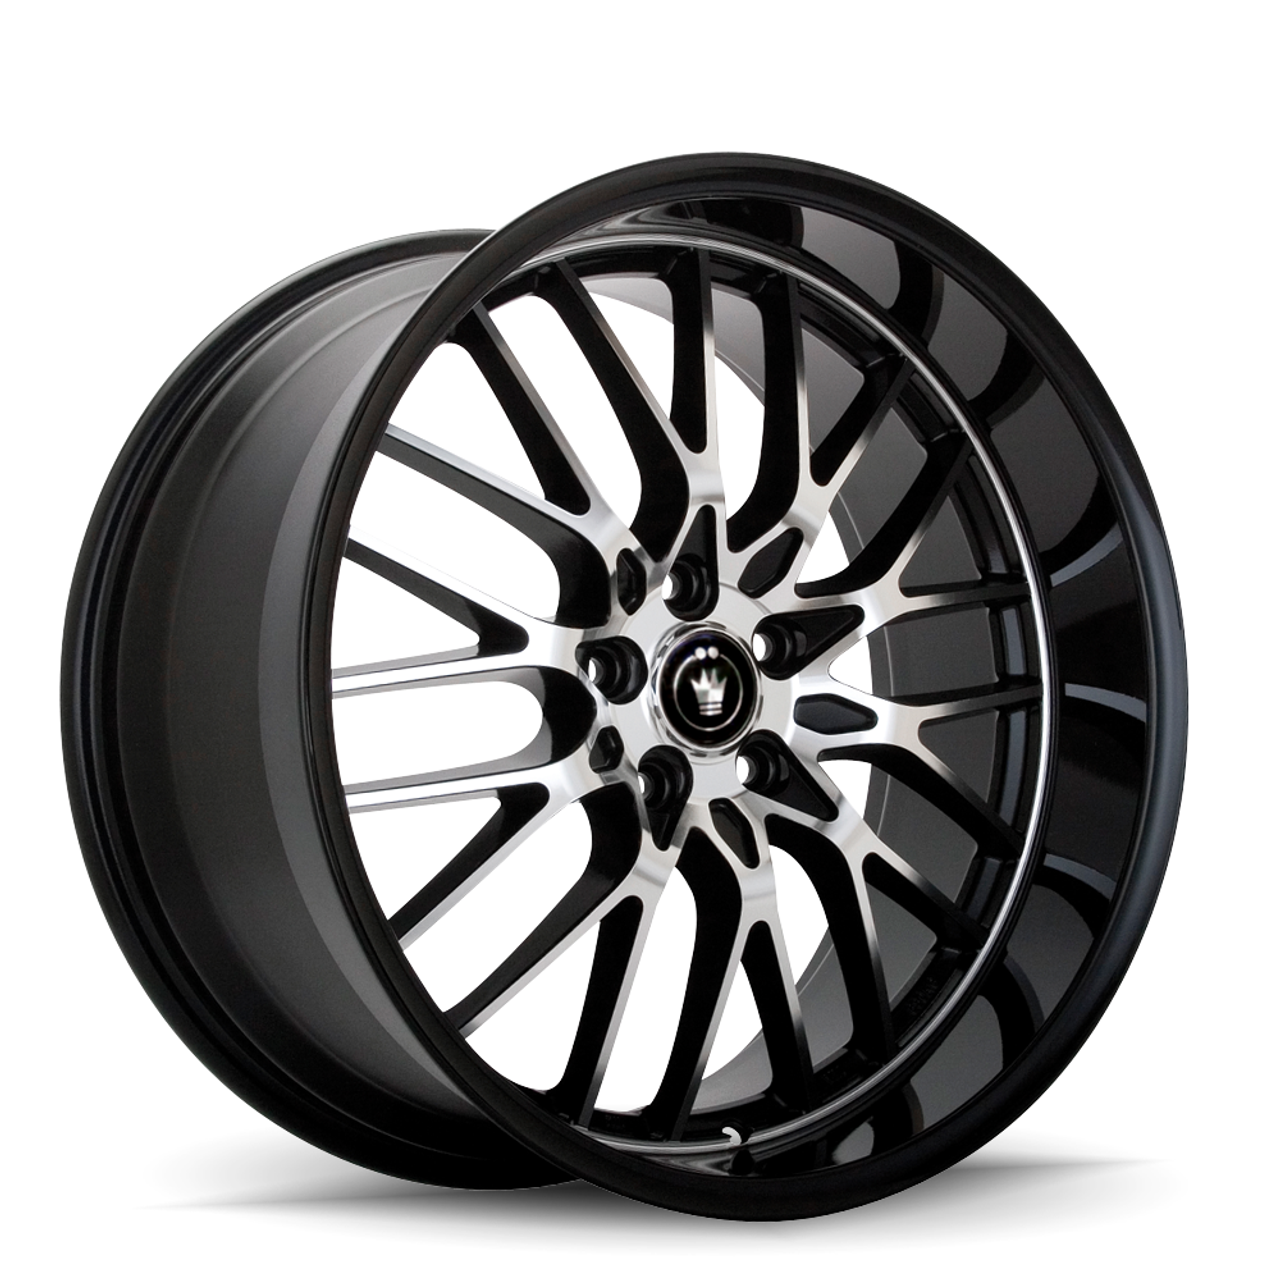 18" Konig 16MB Lace 18x8 5x112 Gloss Black with Machined Face Wheel 45mm Rim